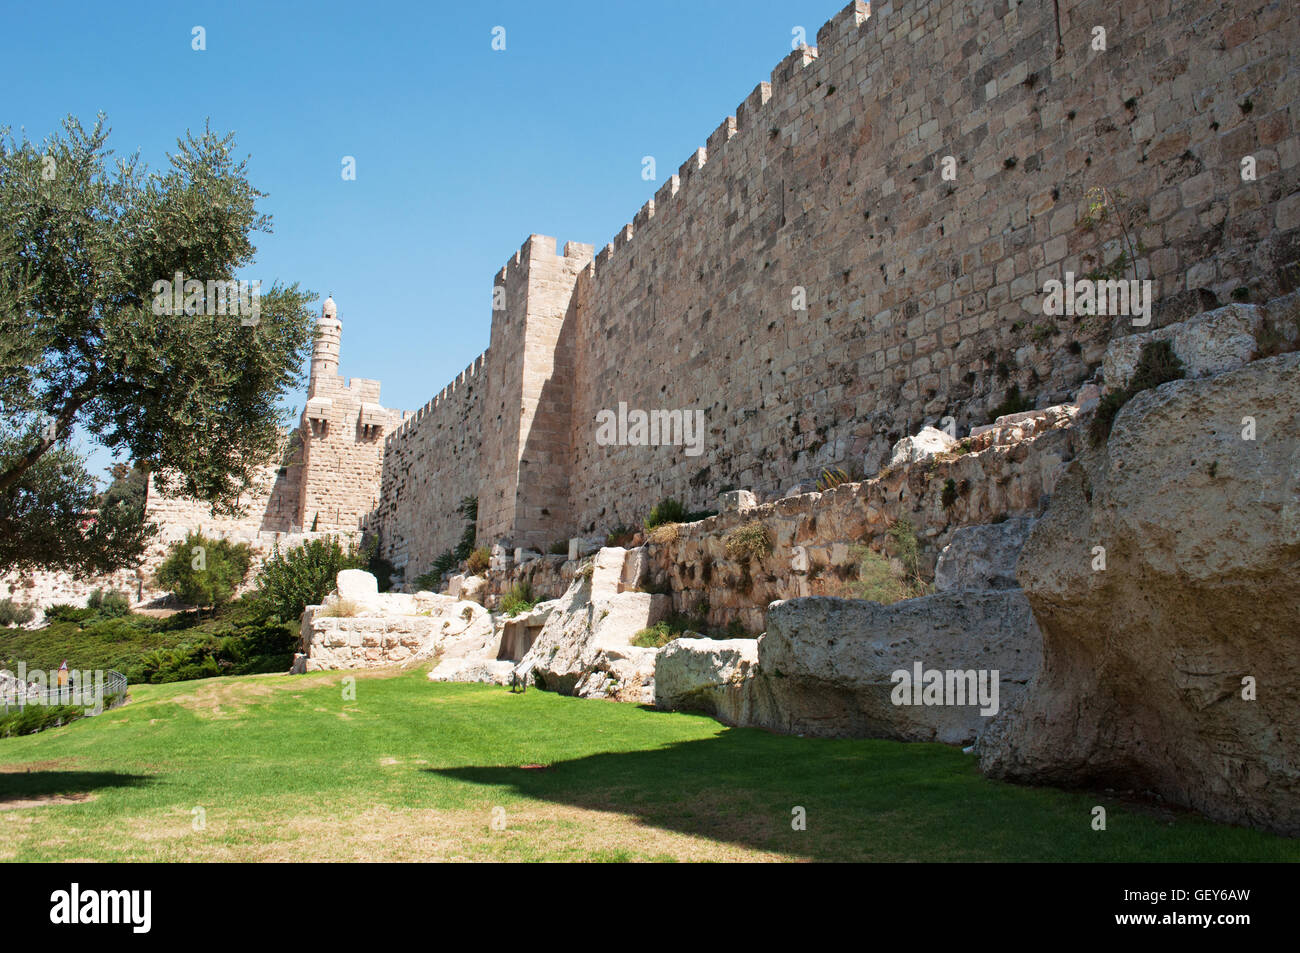 Jerusalem, Old City: the ancient walls surrounding the Old City, built under Suleiman the Magnificent between 1537 and 1541 Stock Photo